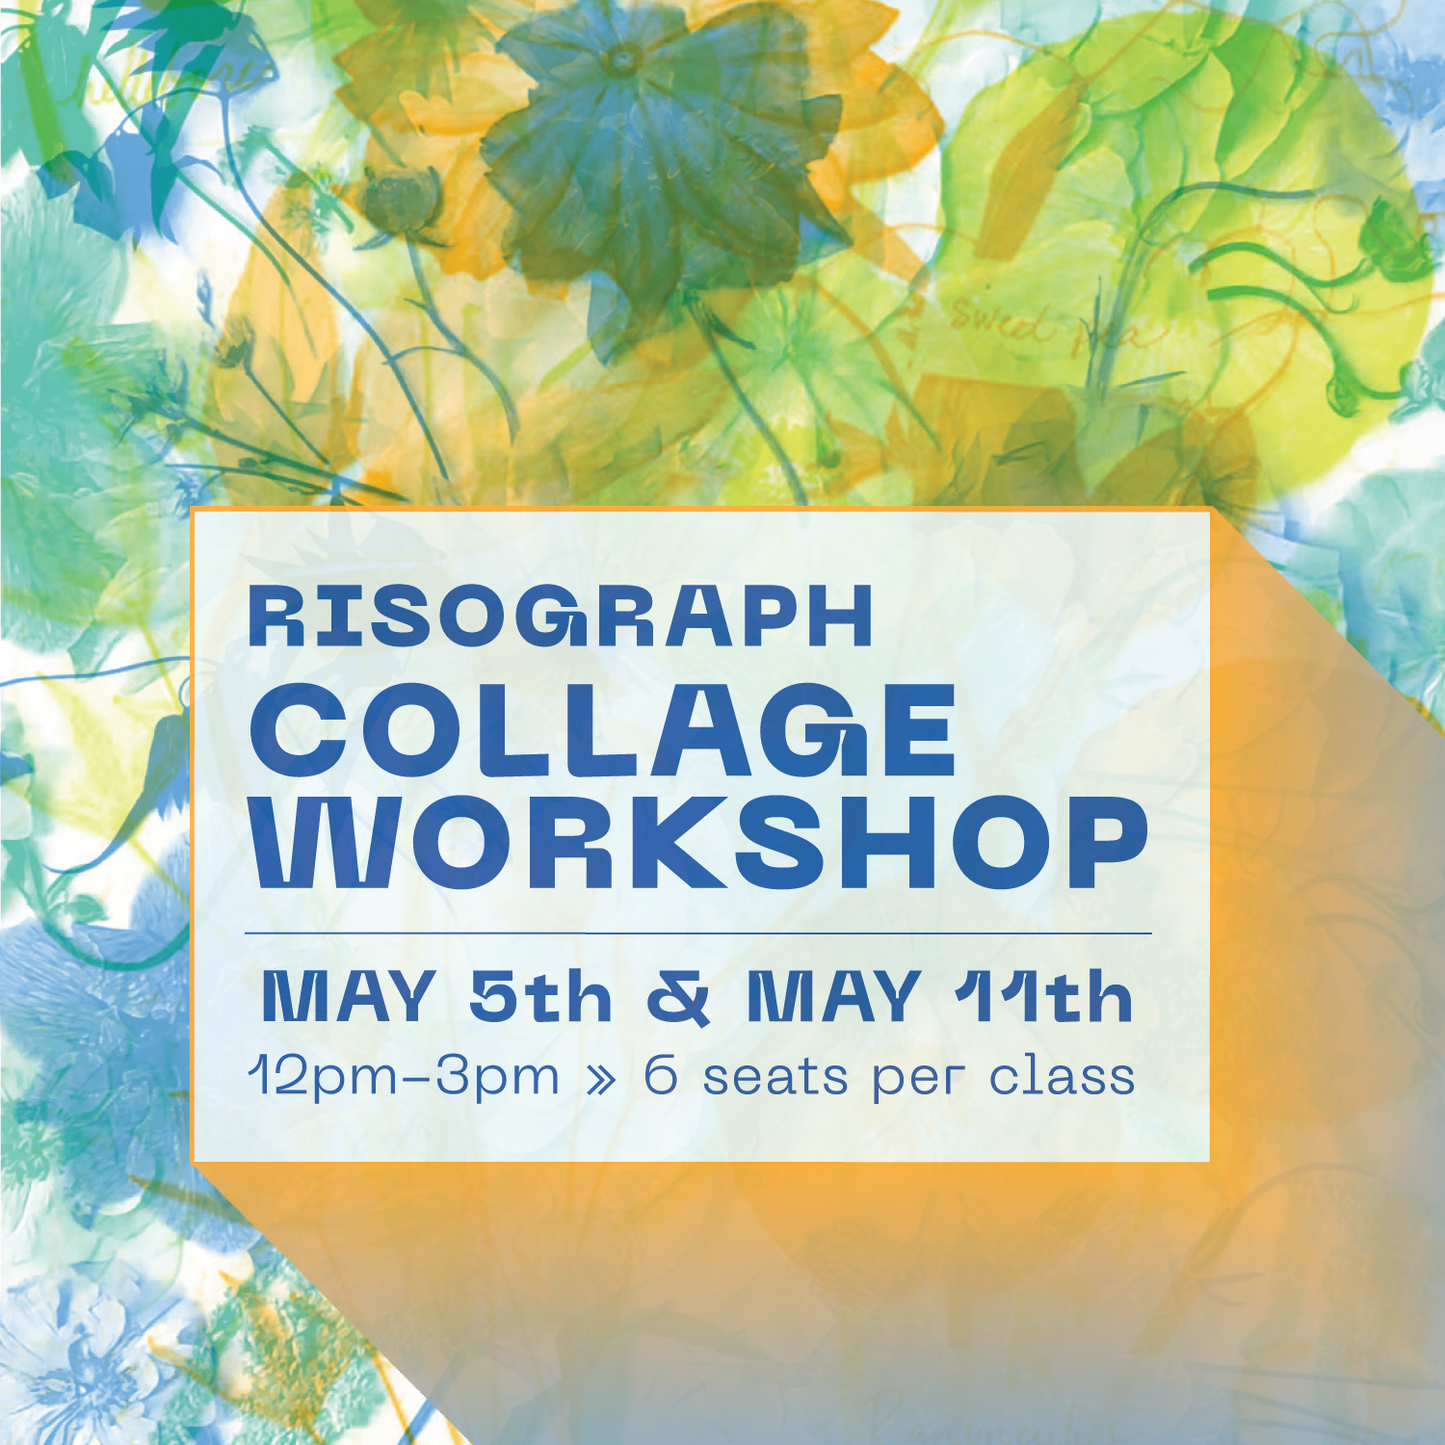 MAY 5th - Risograph Collage Workshop